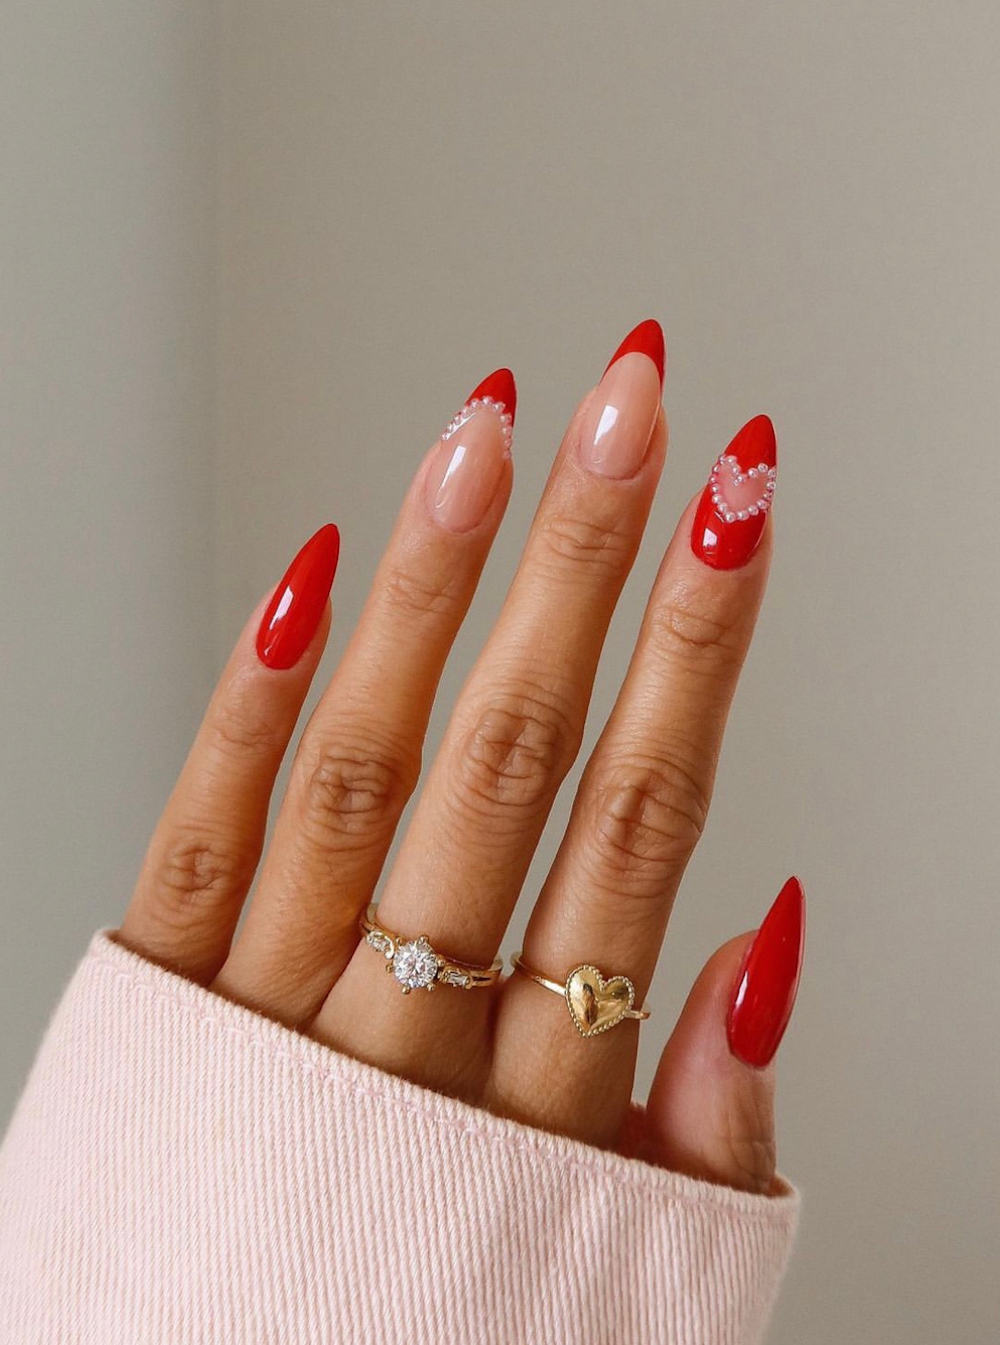 A hand with long nude almond nails with cherry red solid-colored nails and French tips with heart accents and pearl details